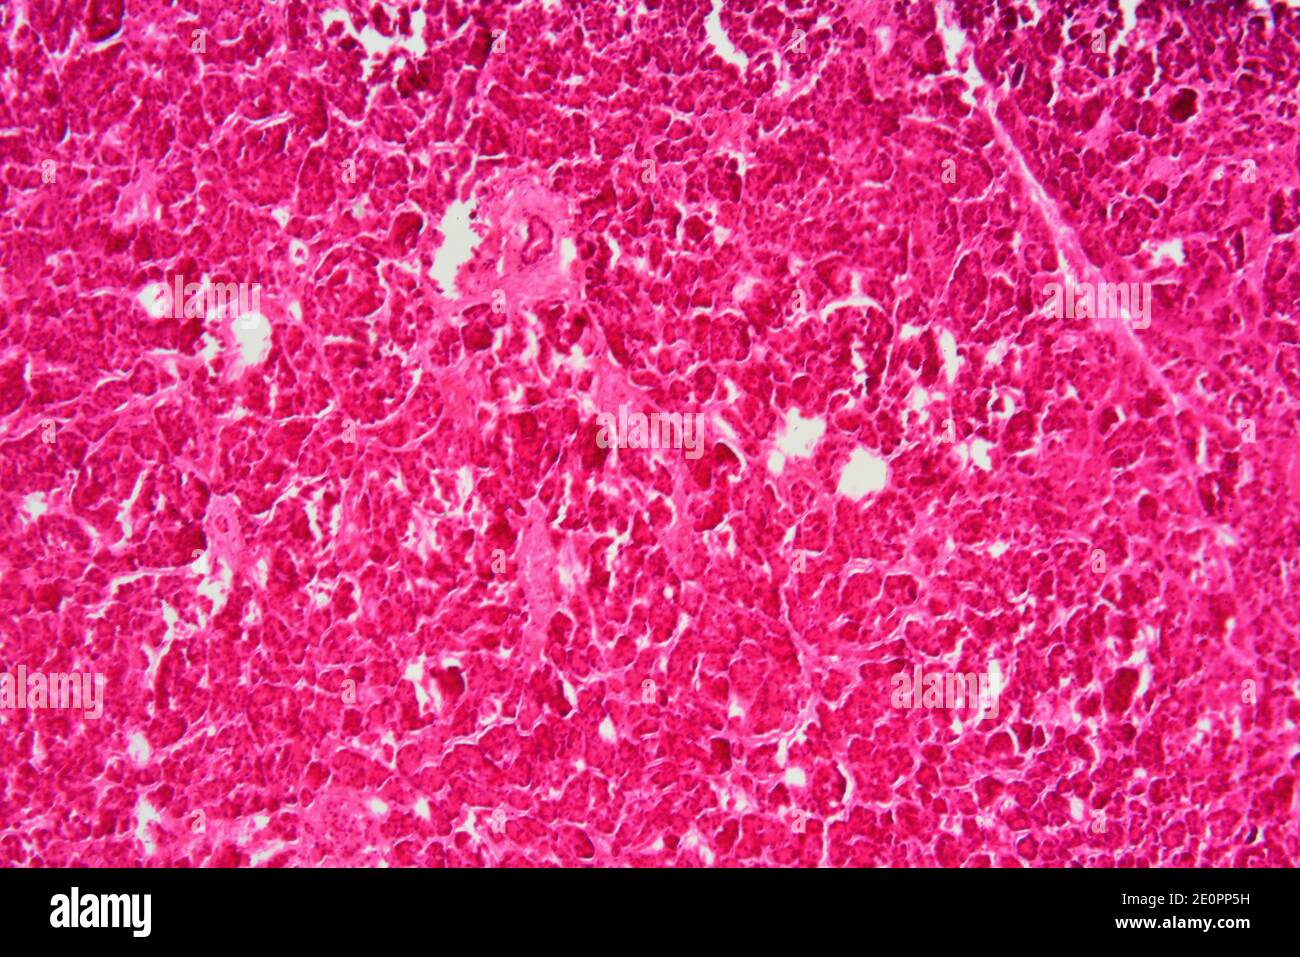 Human pancreas is an endocrine and exocrine organ. X75 at 10 cm wide. Stock Photo